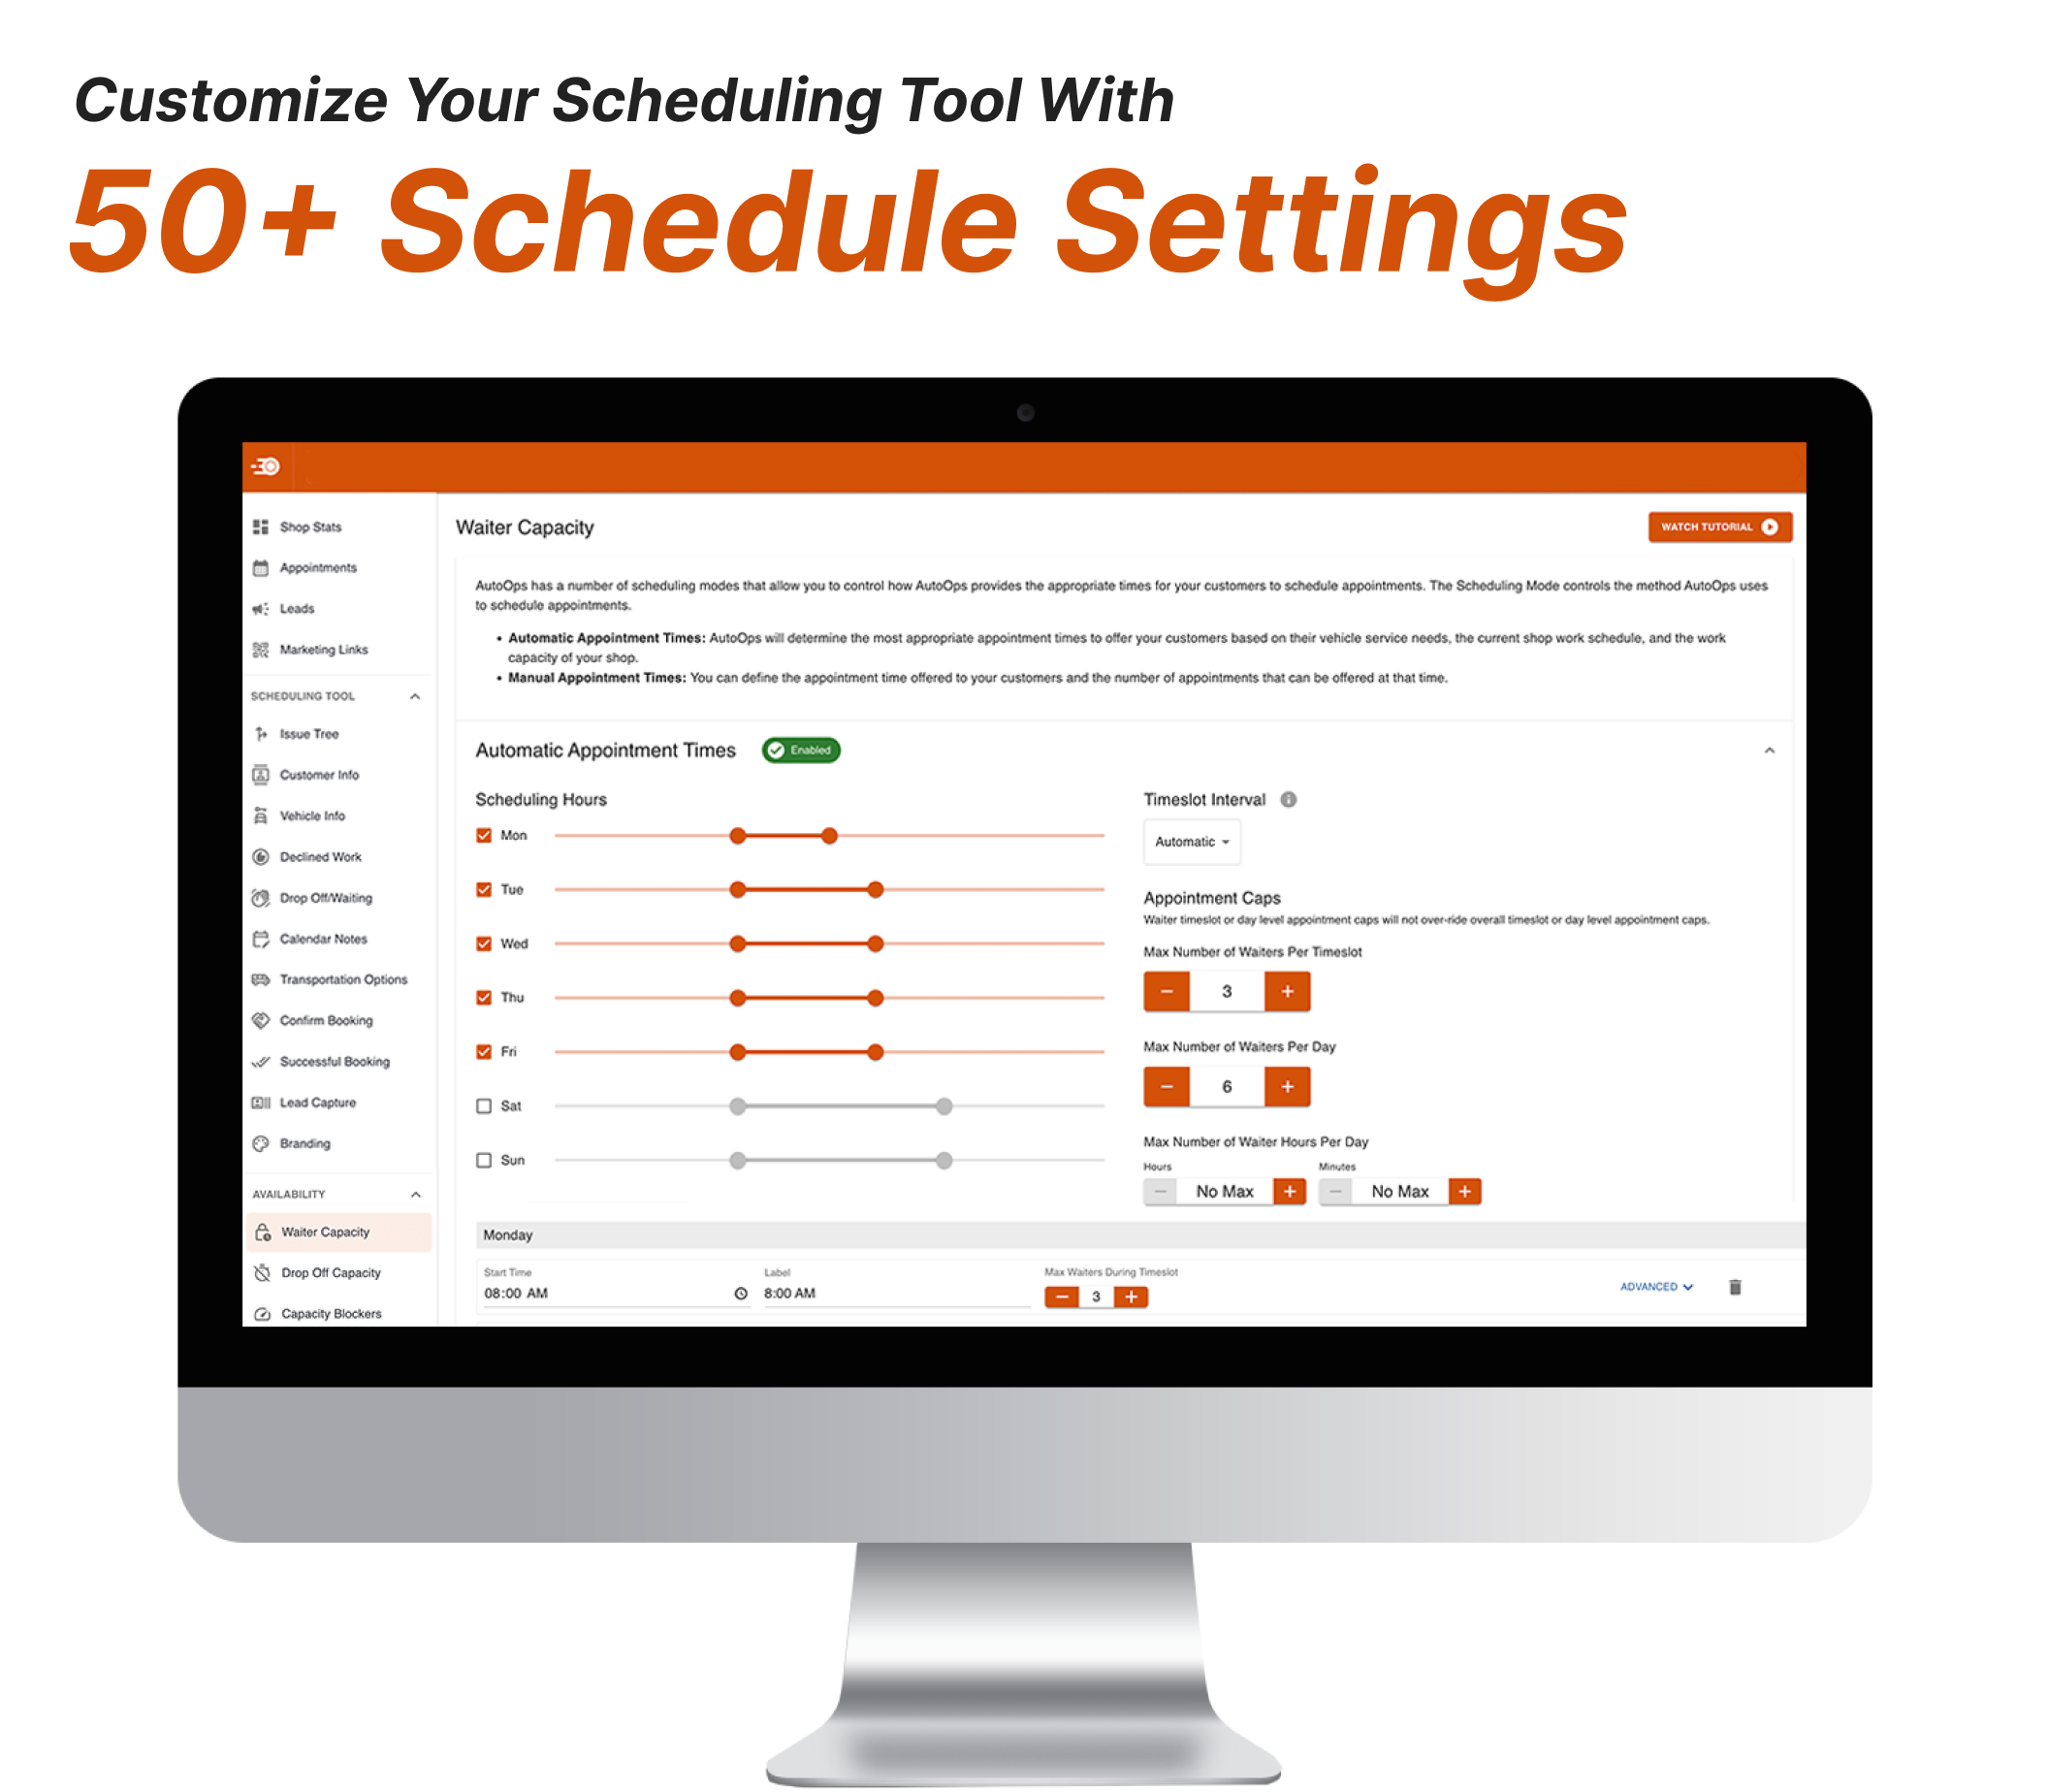 Customize the way customers create online appointments with over 50 unique schedule settings